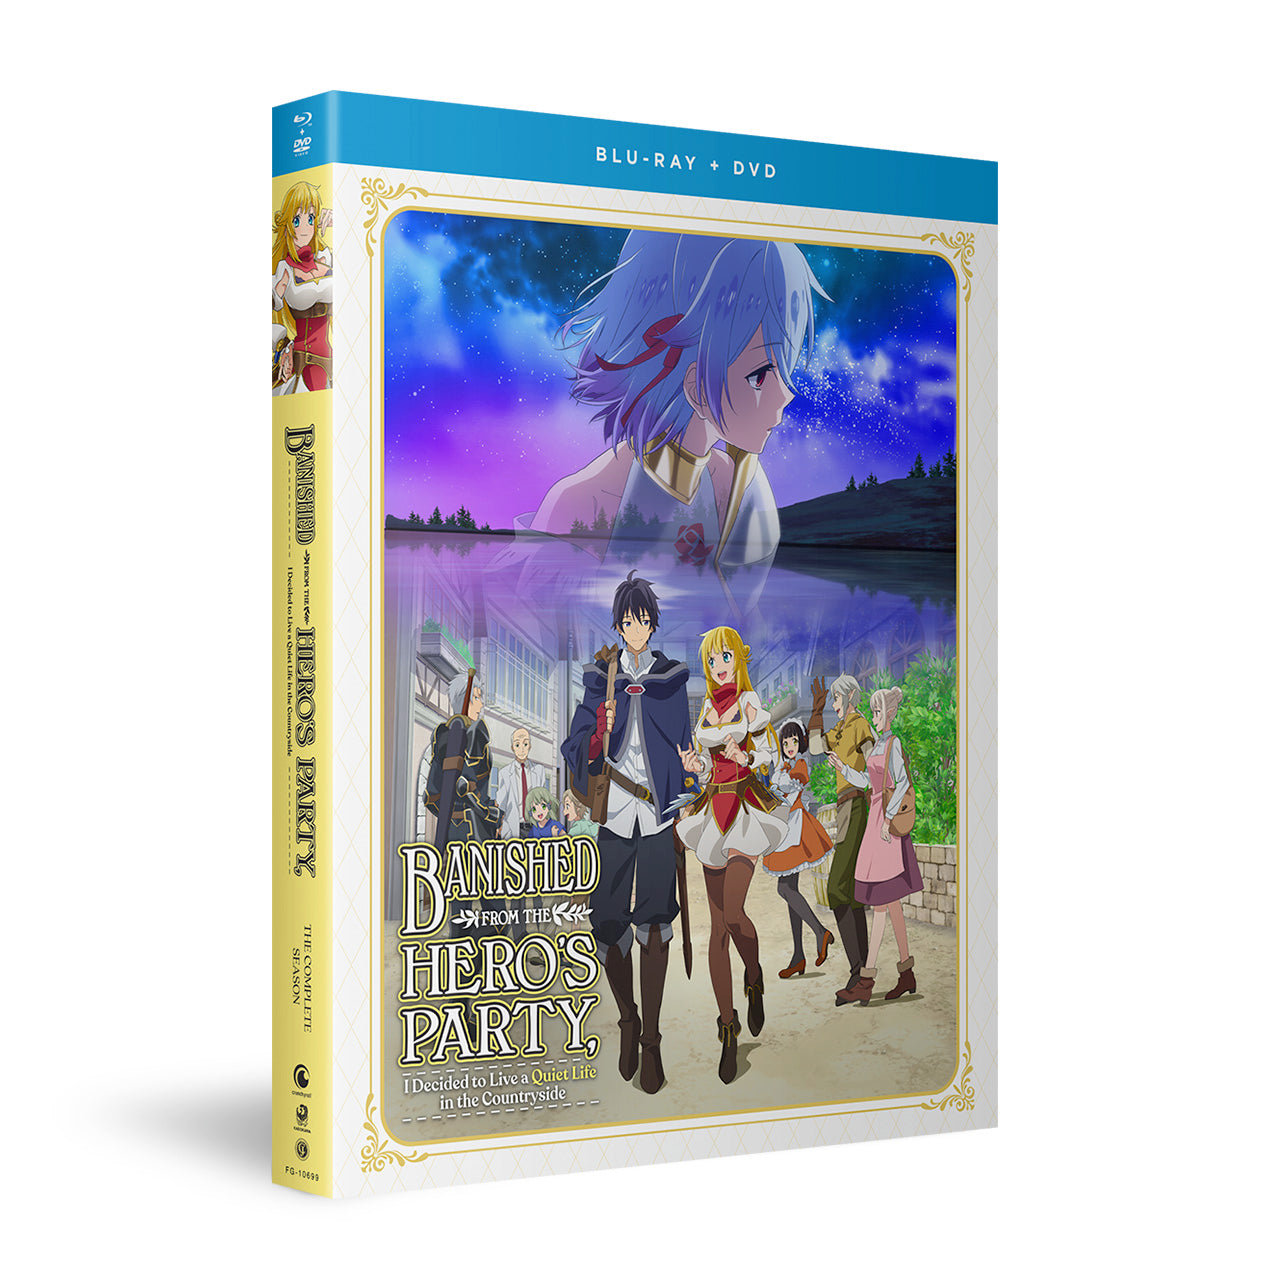 Banished from the Hero's Party I Decided to Live a Quiet Life in the Countryside - The Complete Season - Limited Edition - Blu-ray + DVD image count 1